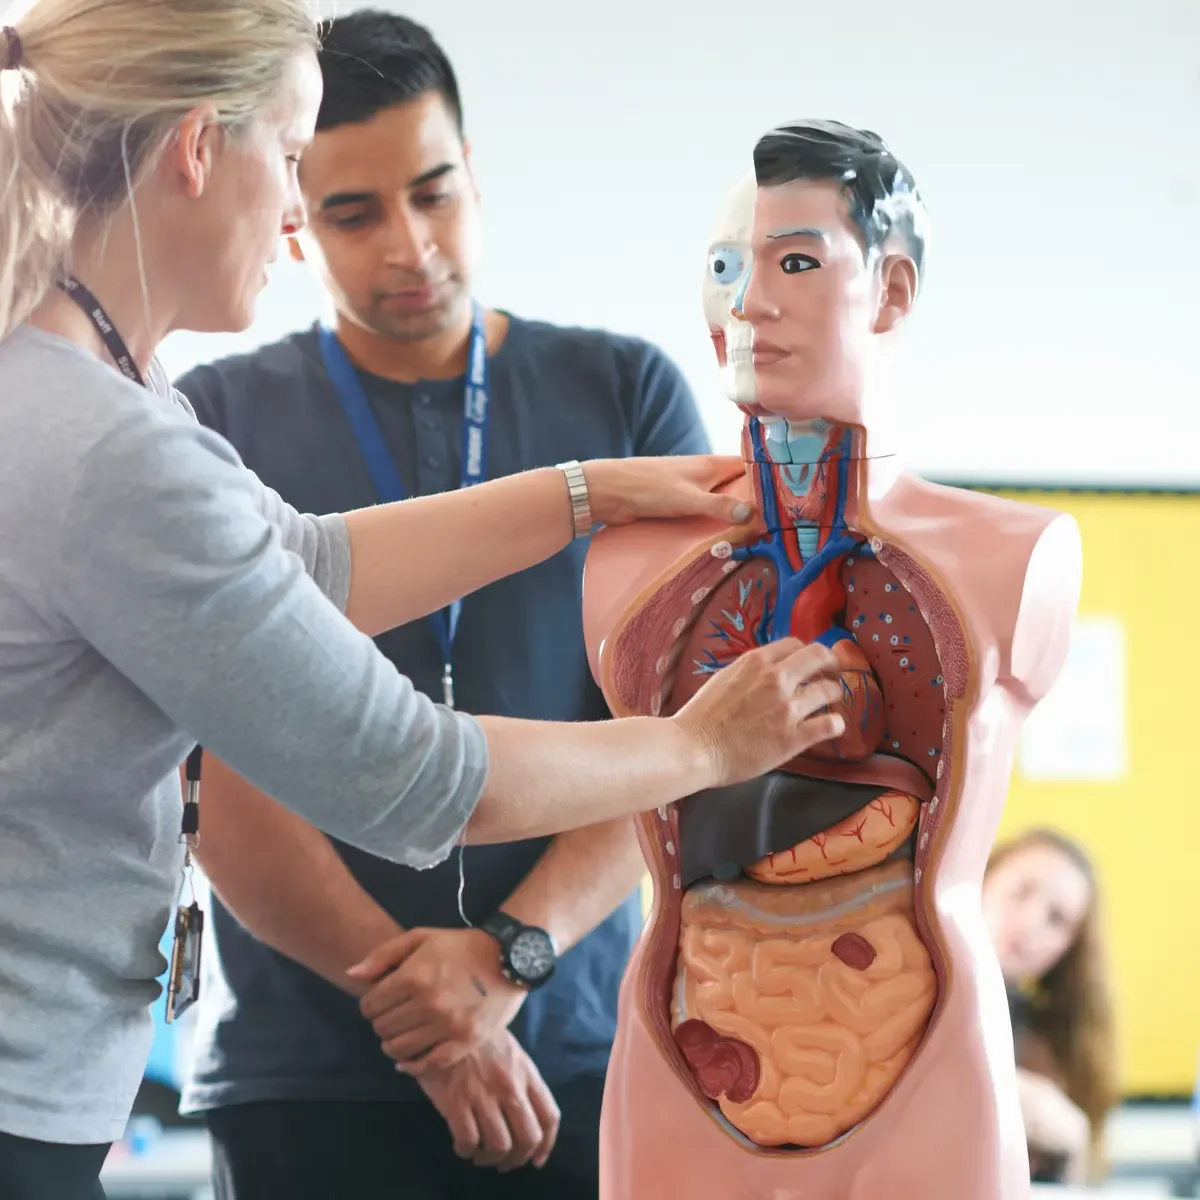 VTCT Level 3 Award in Anatomical and Physiological Knowledge of Body Systems Online Course